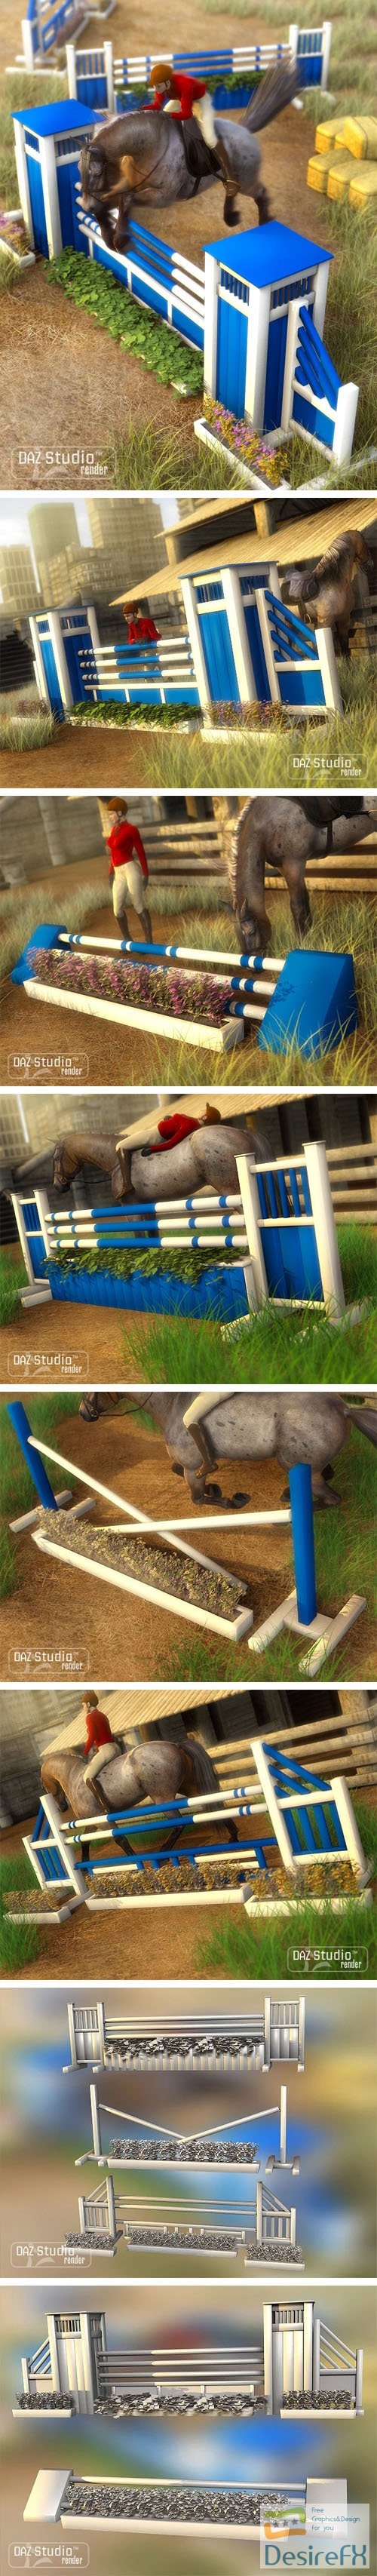 Jump Your Way - Set of Jumping Gates